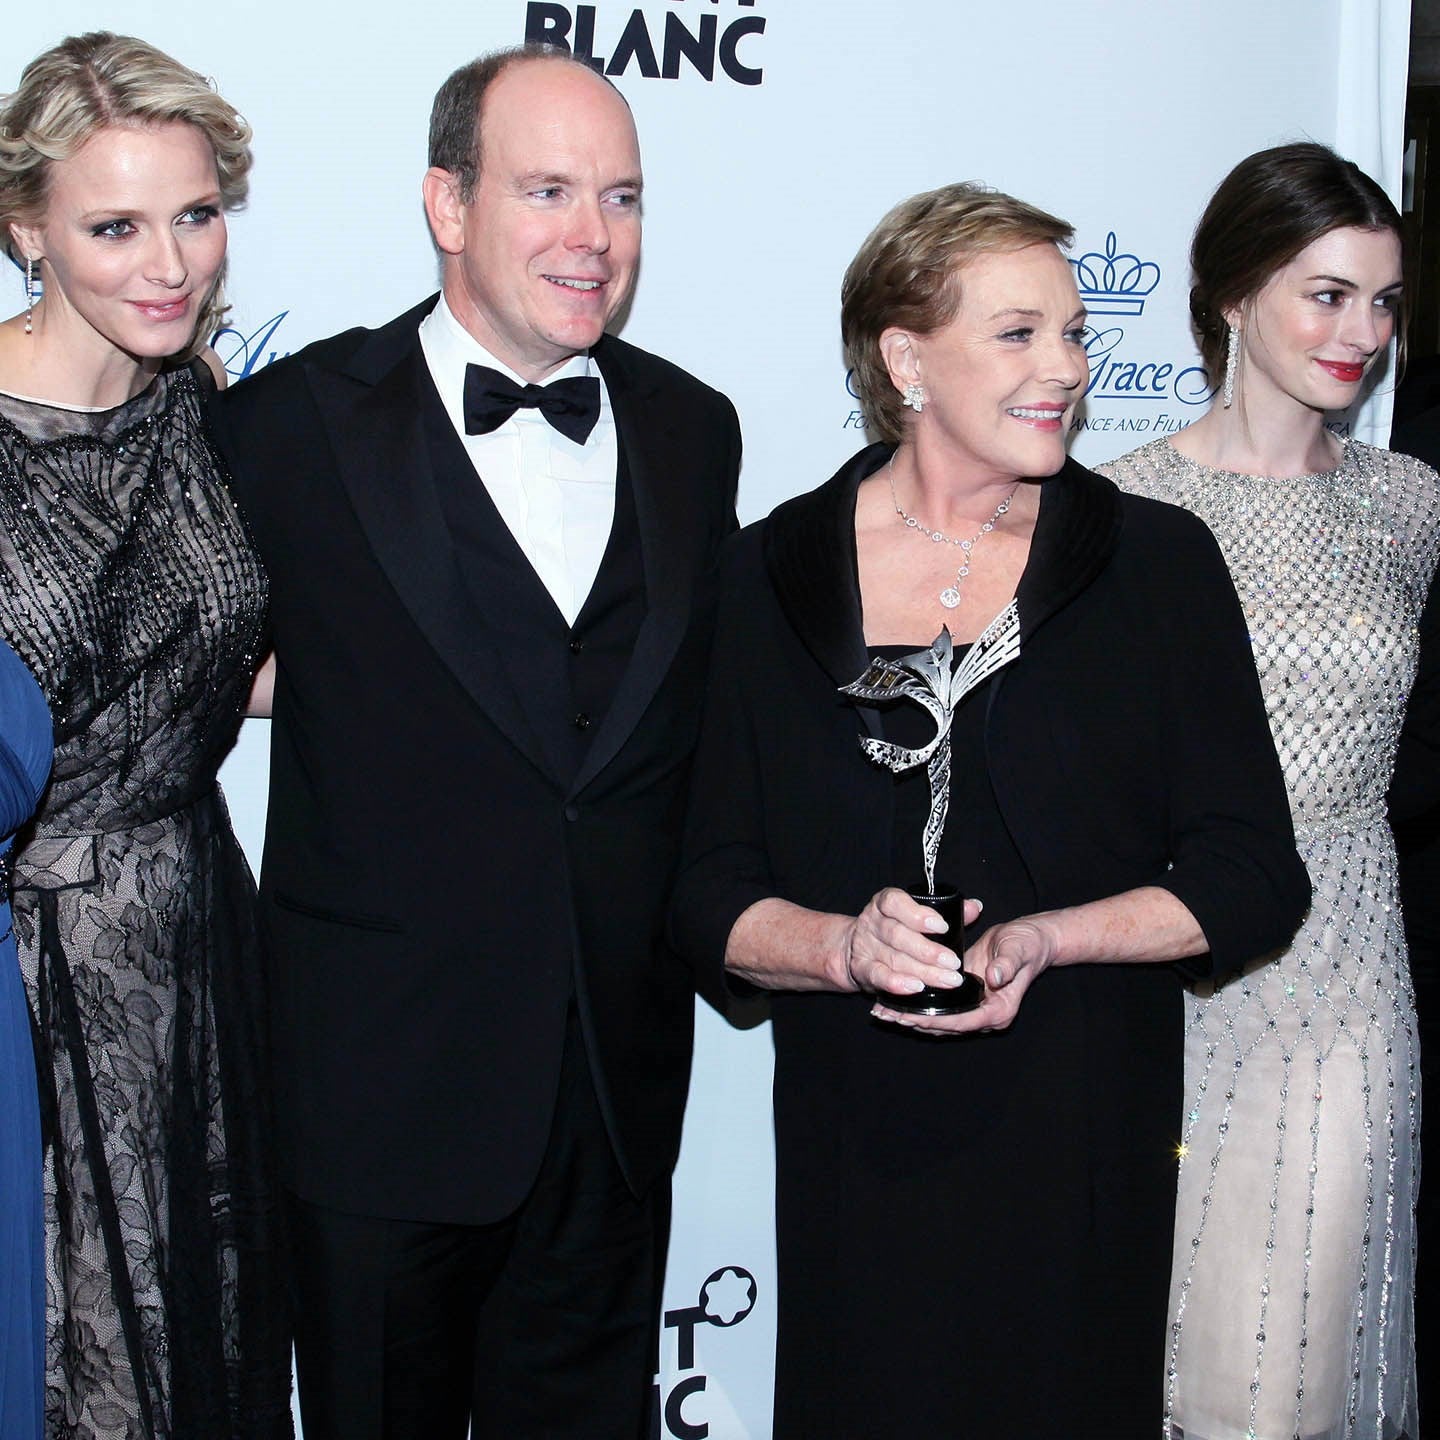 HSH Prince of Monaco and Anne Hathaway present Julie Andrews with Princess Grace Award, designed and created by Alex Soldier.